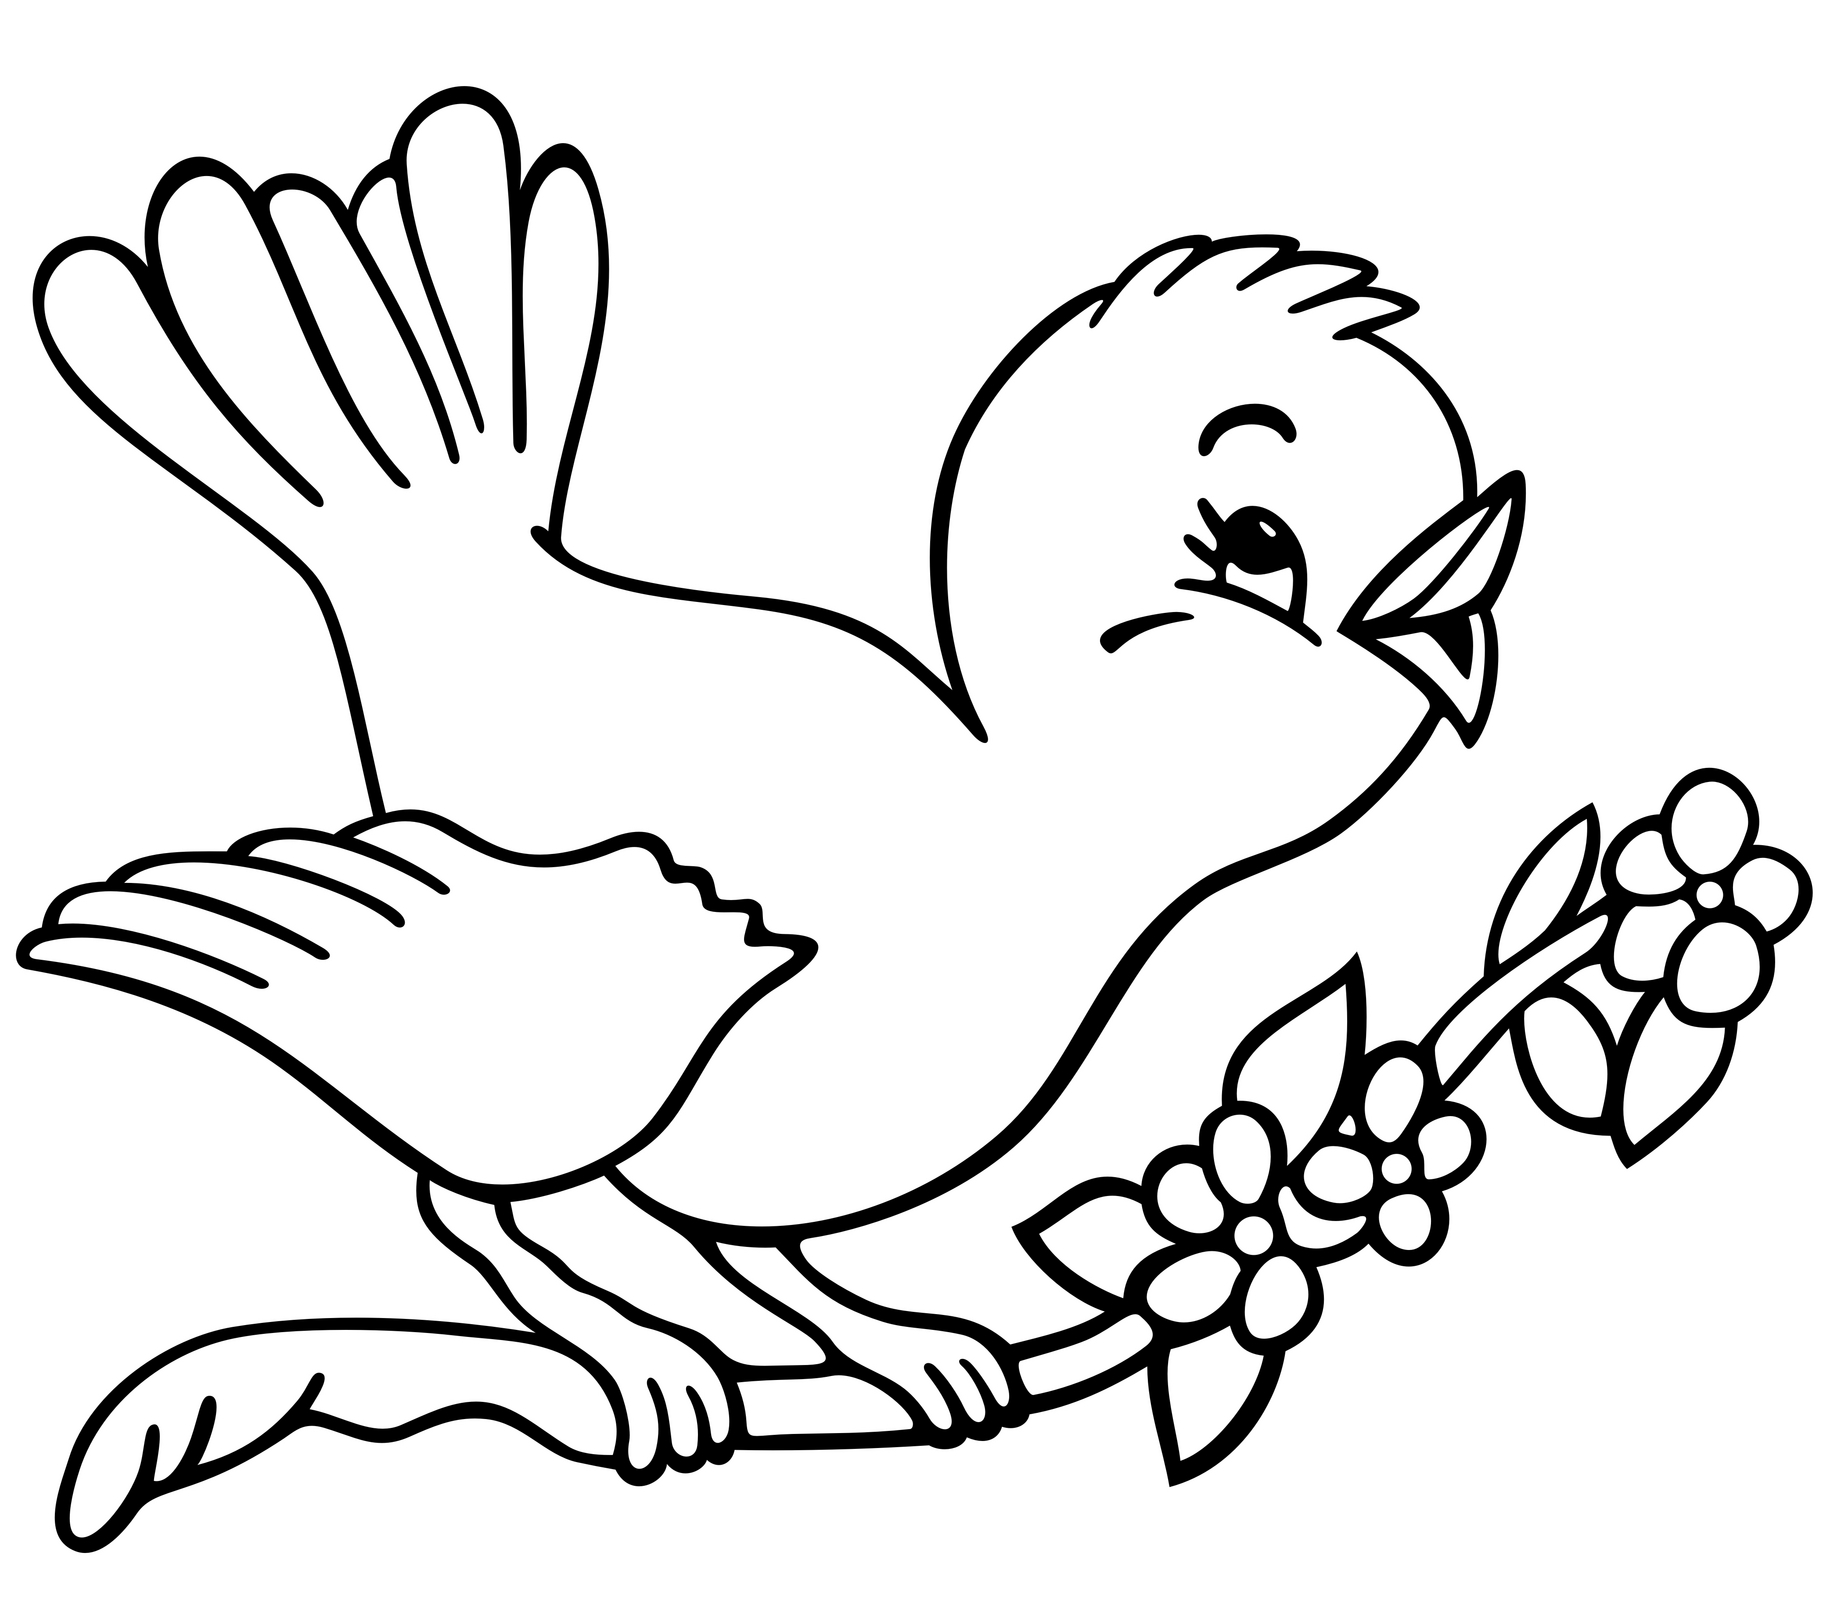 sparrow image colouring pages